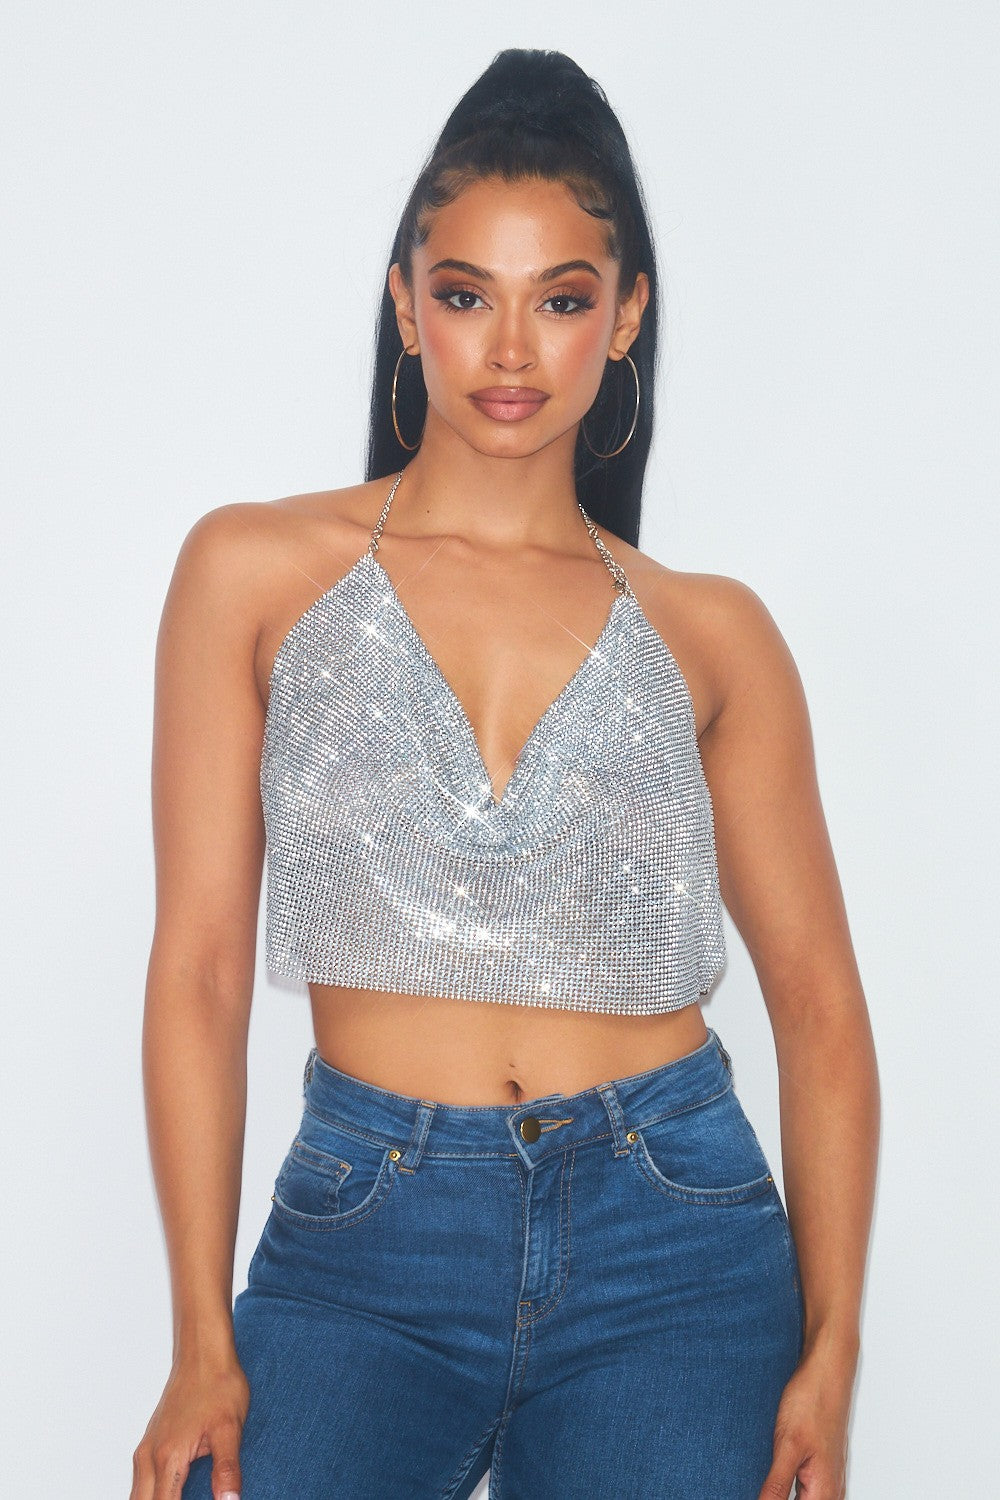 rhinestone chainmail halter top – RK Collections Boutique